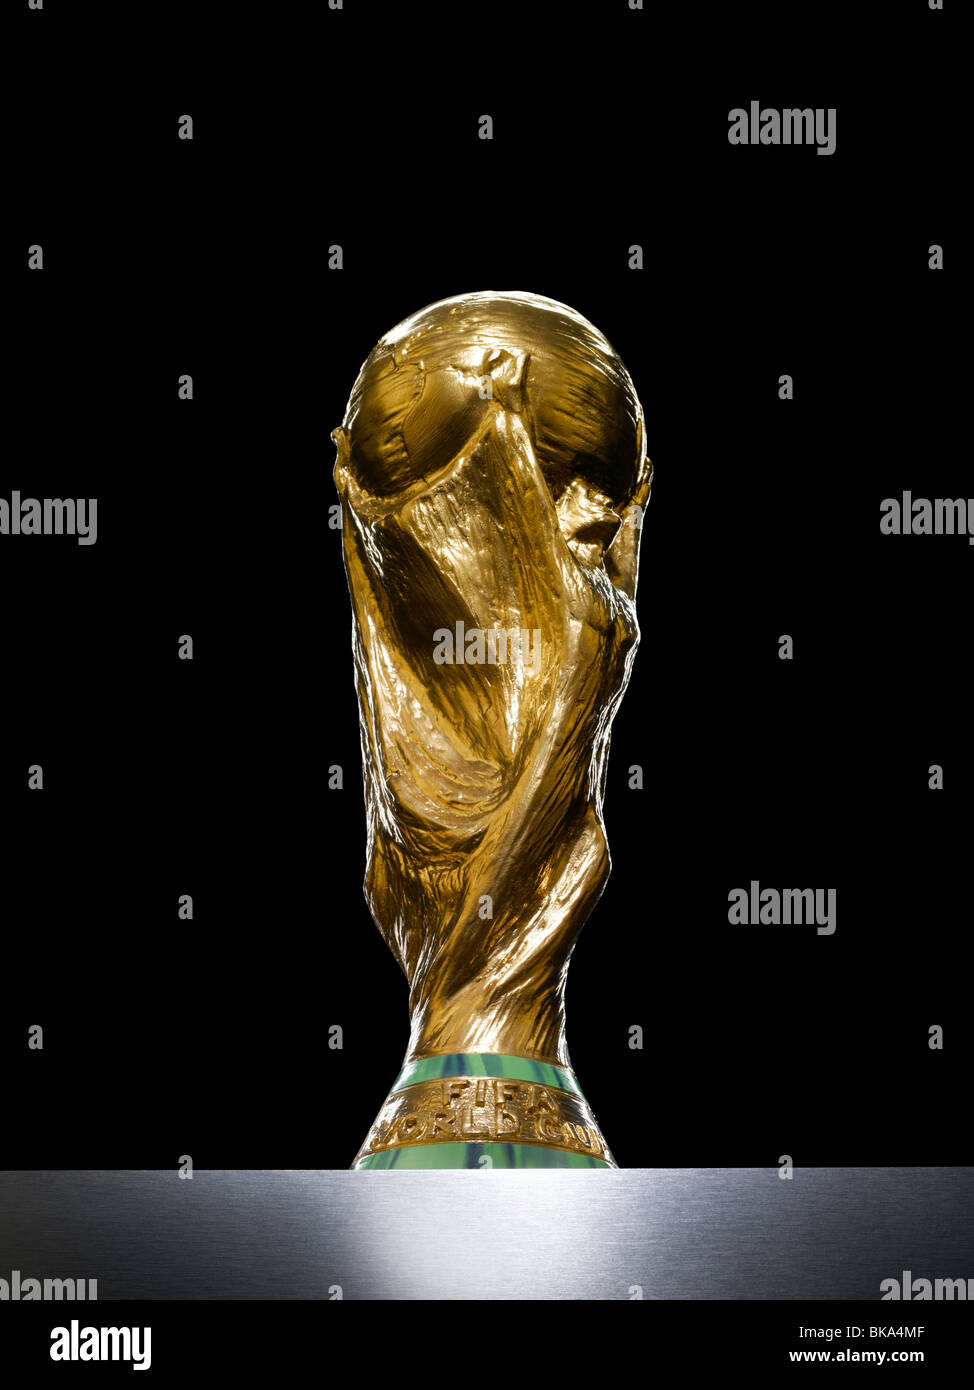 World Cup Football Trophy in the spotlight Stock Photo